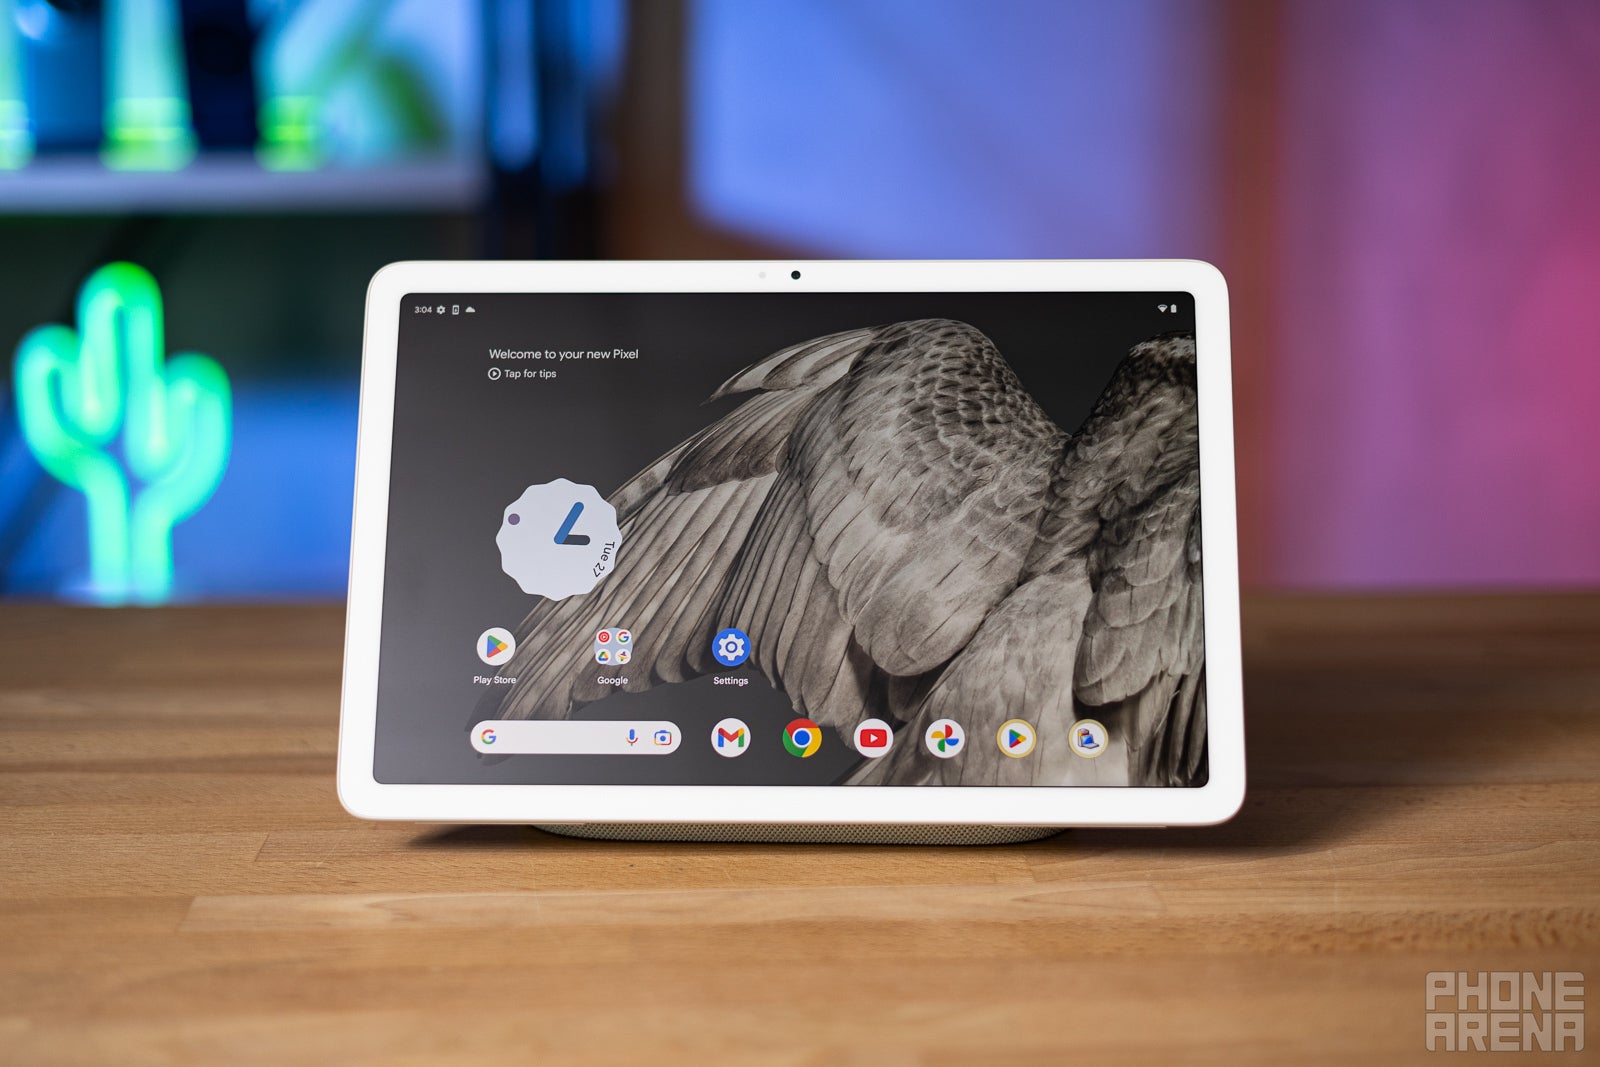 Google Pixel Tablet with Charging Speaker Dock - Android Tablet with  11-Inch Screen, Smart Home Controls, and Long-Lasting Battery - Hazel/Hazel  - 128